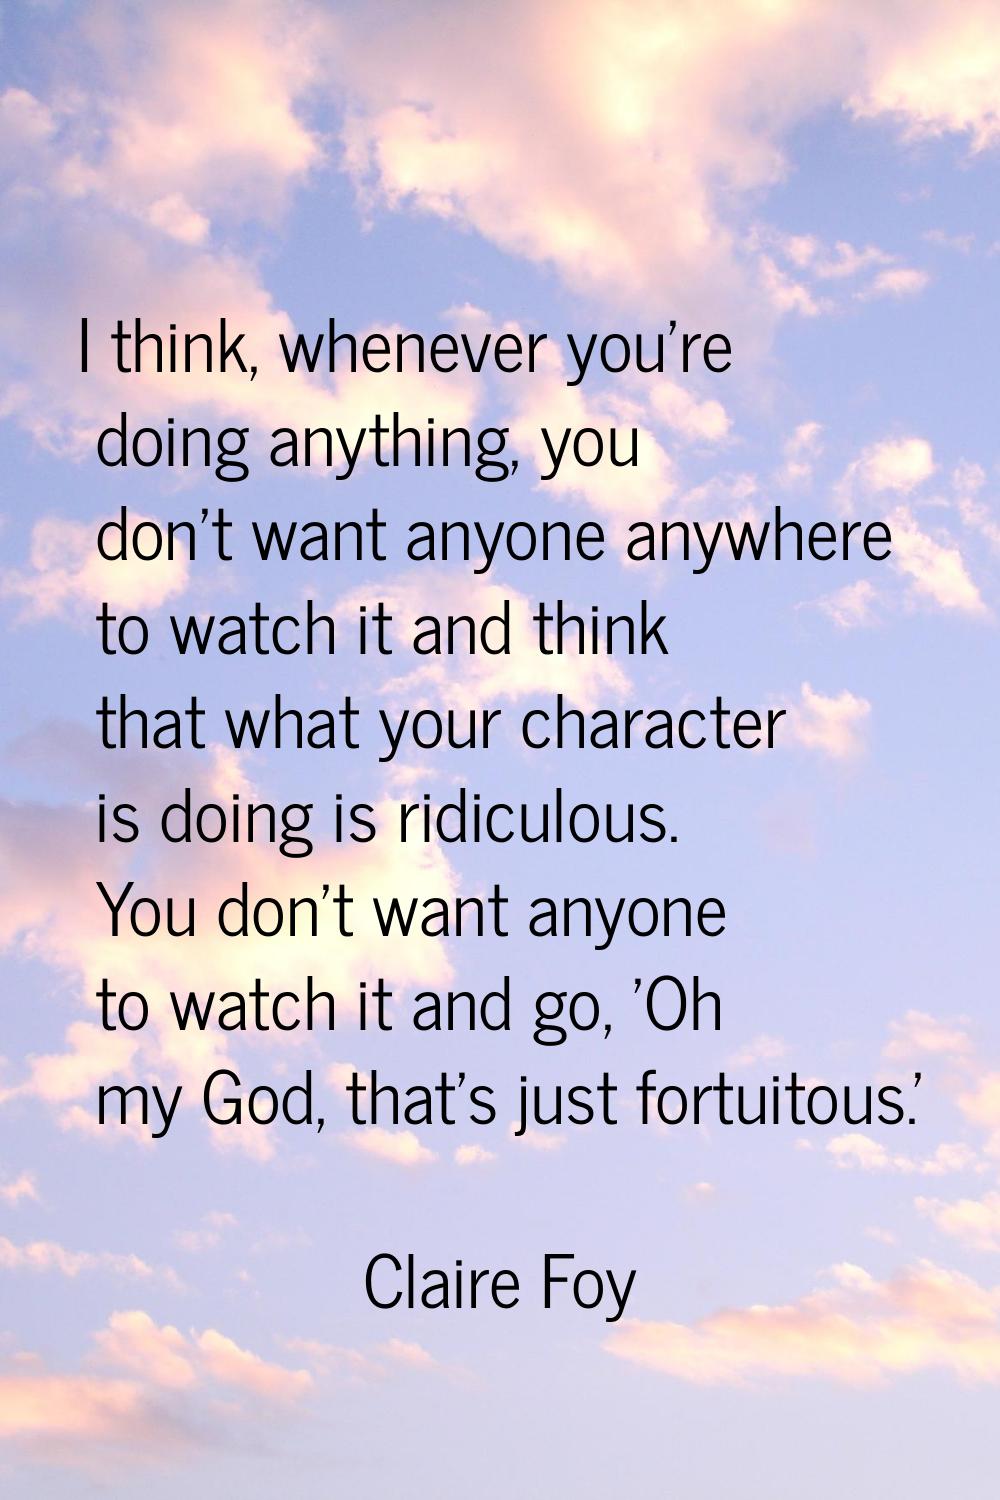 I think, whenever you're doing anything, you don't want anyone anywhere to watch it and think that 